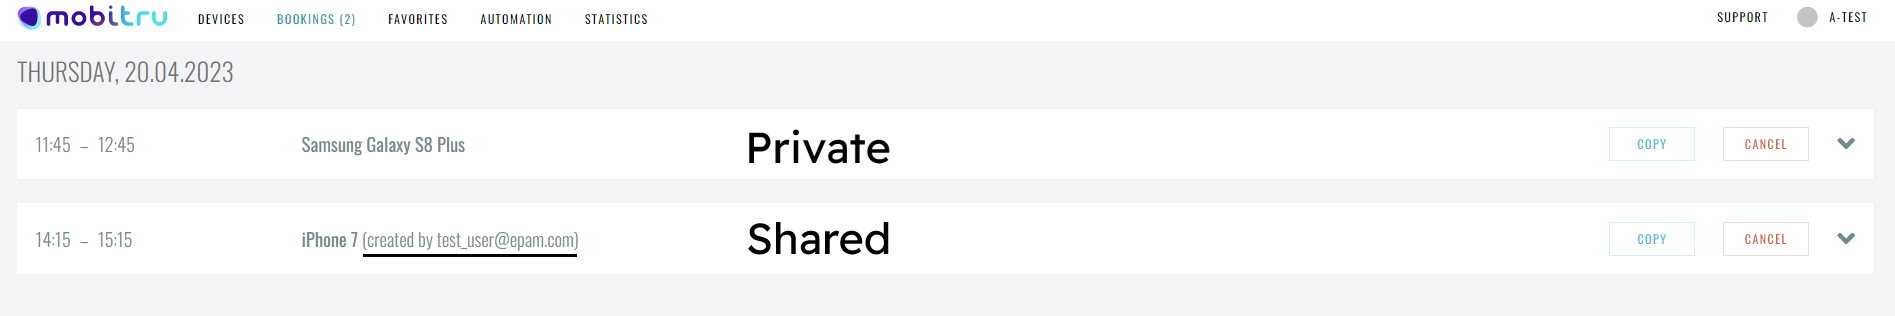 Bookings types: private and shared